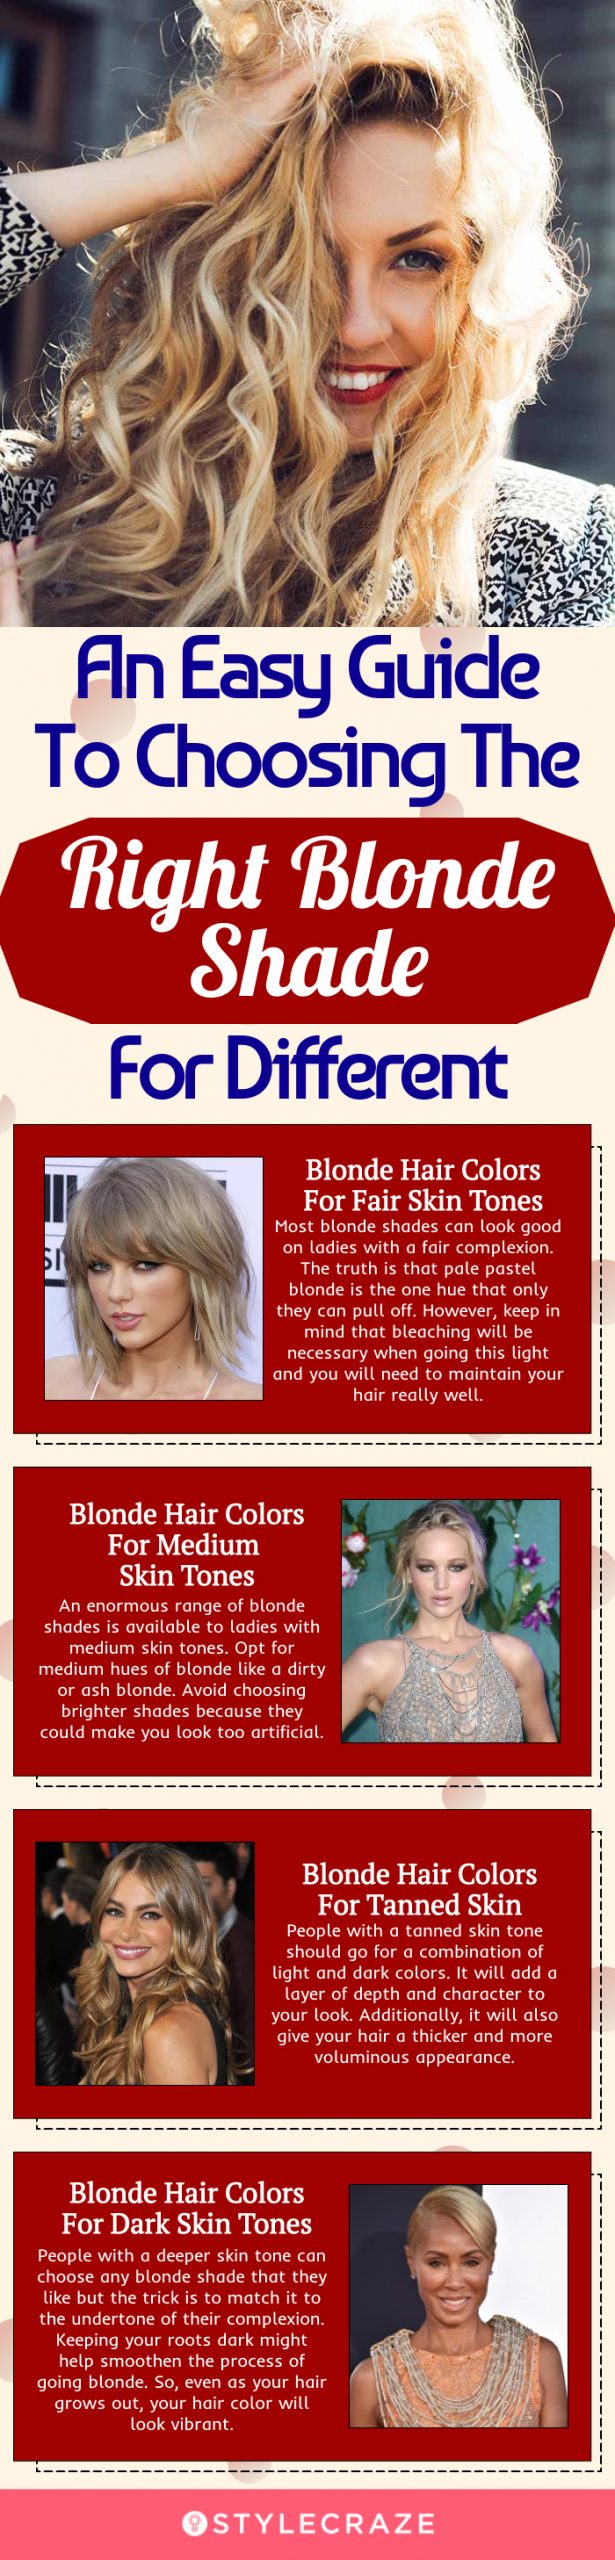 an easy guide to choosing the right blonde shade for different skin tones [infographic]